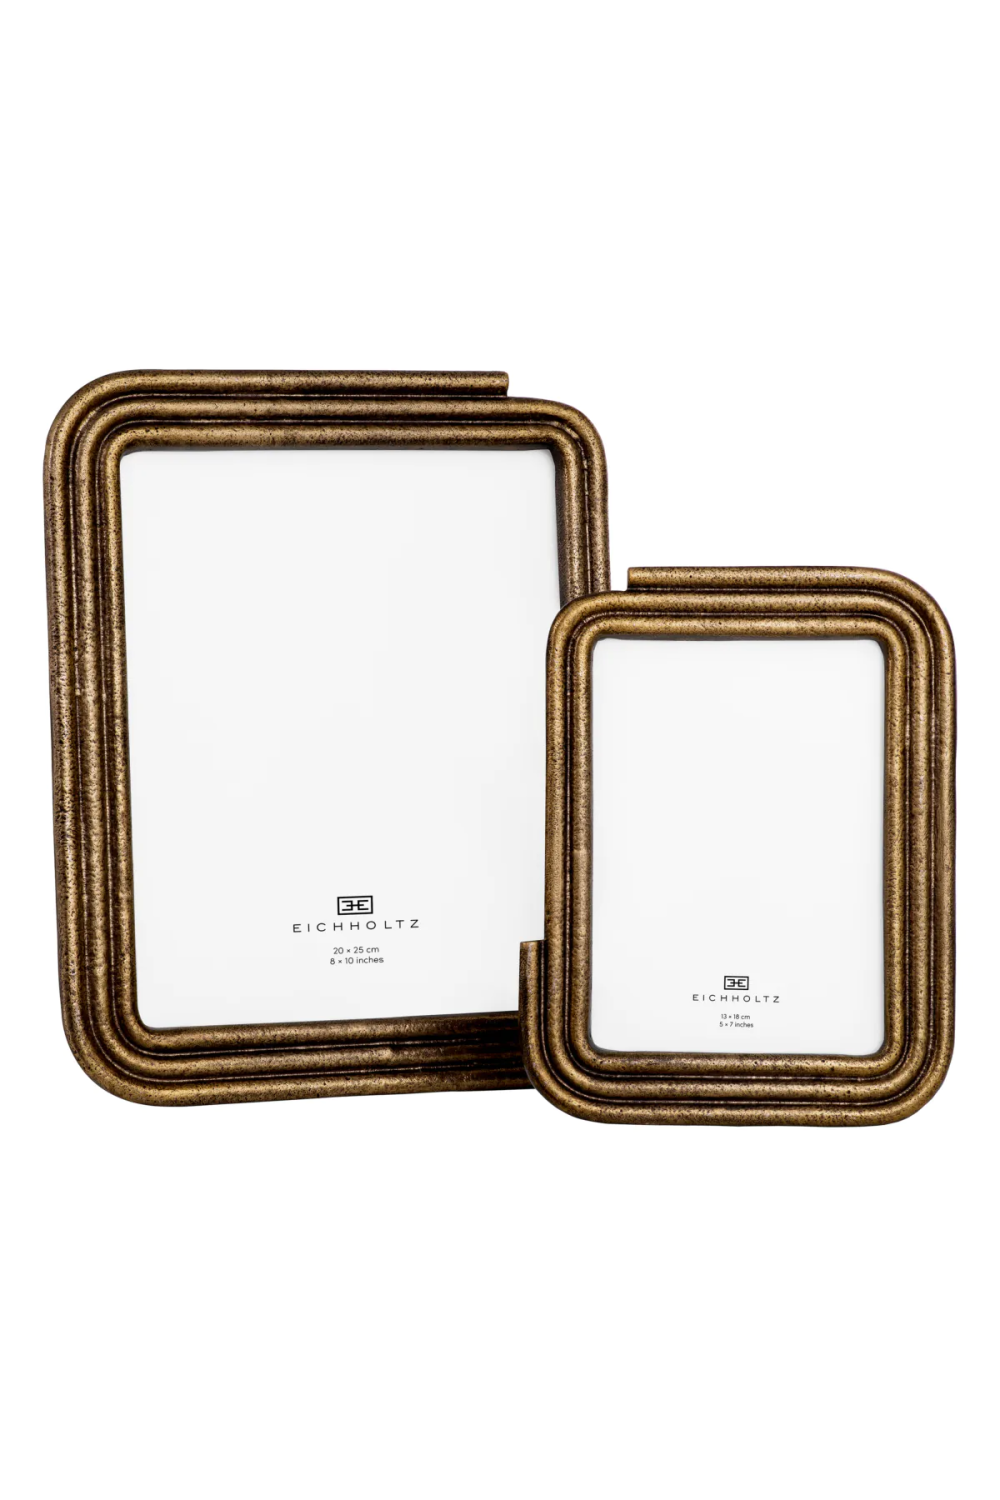 Stylish Picture Frames from Eichholtz